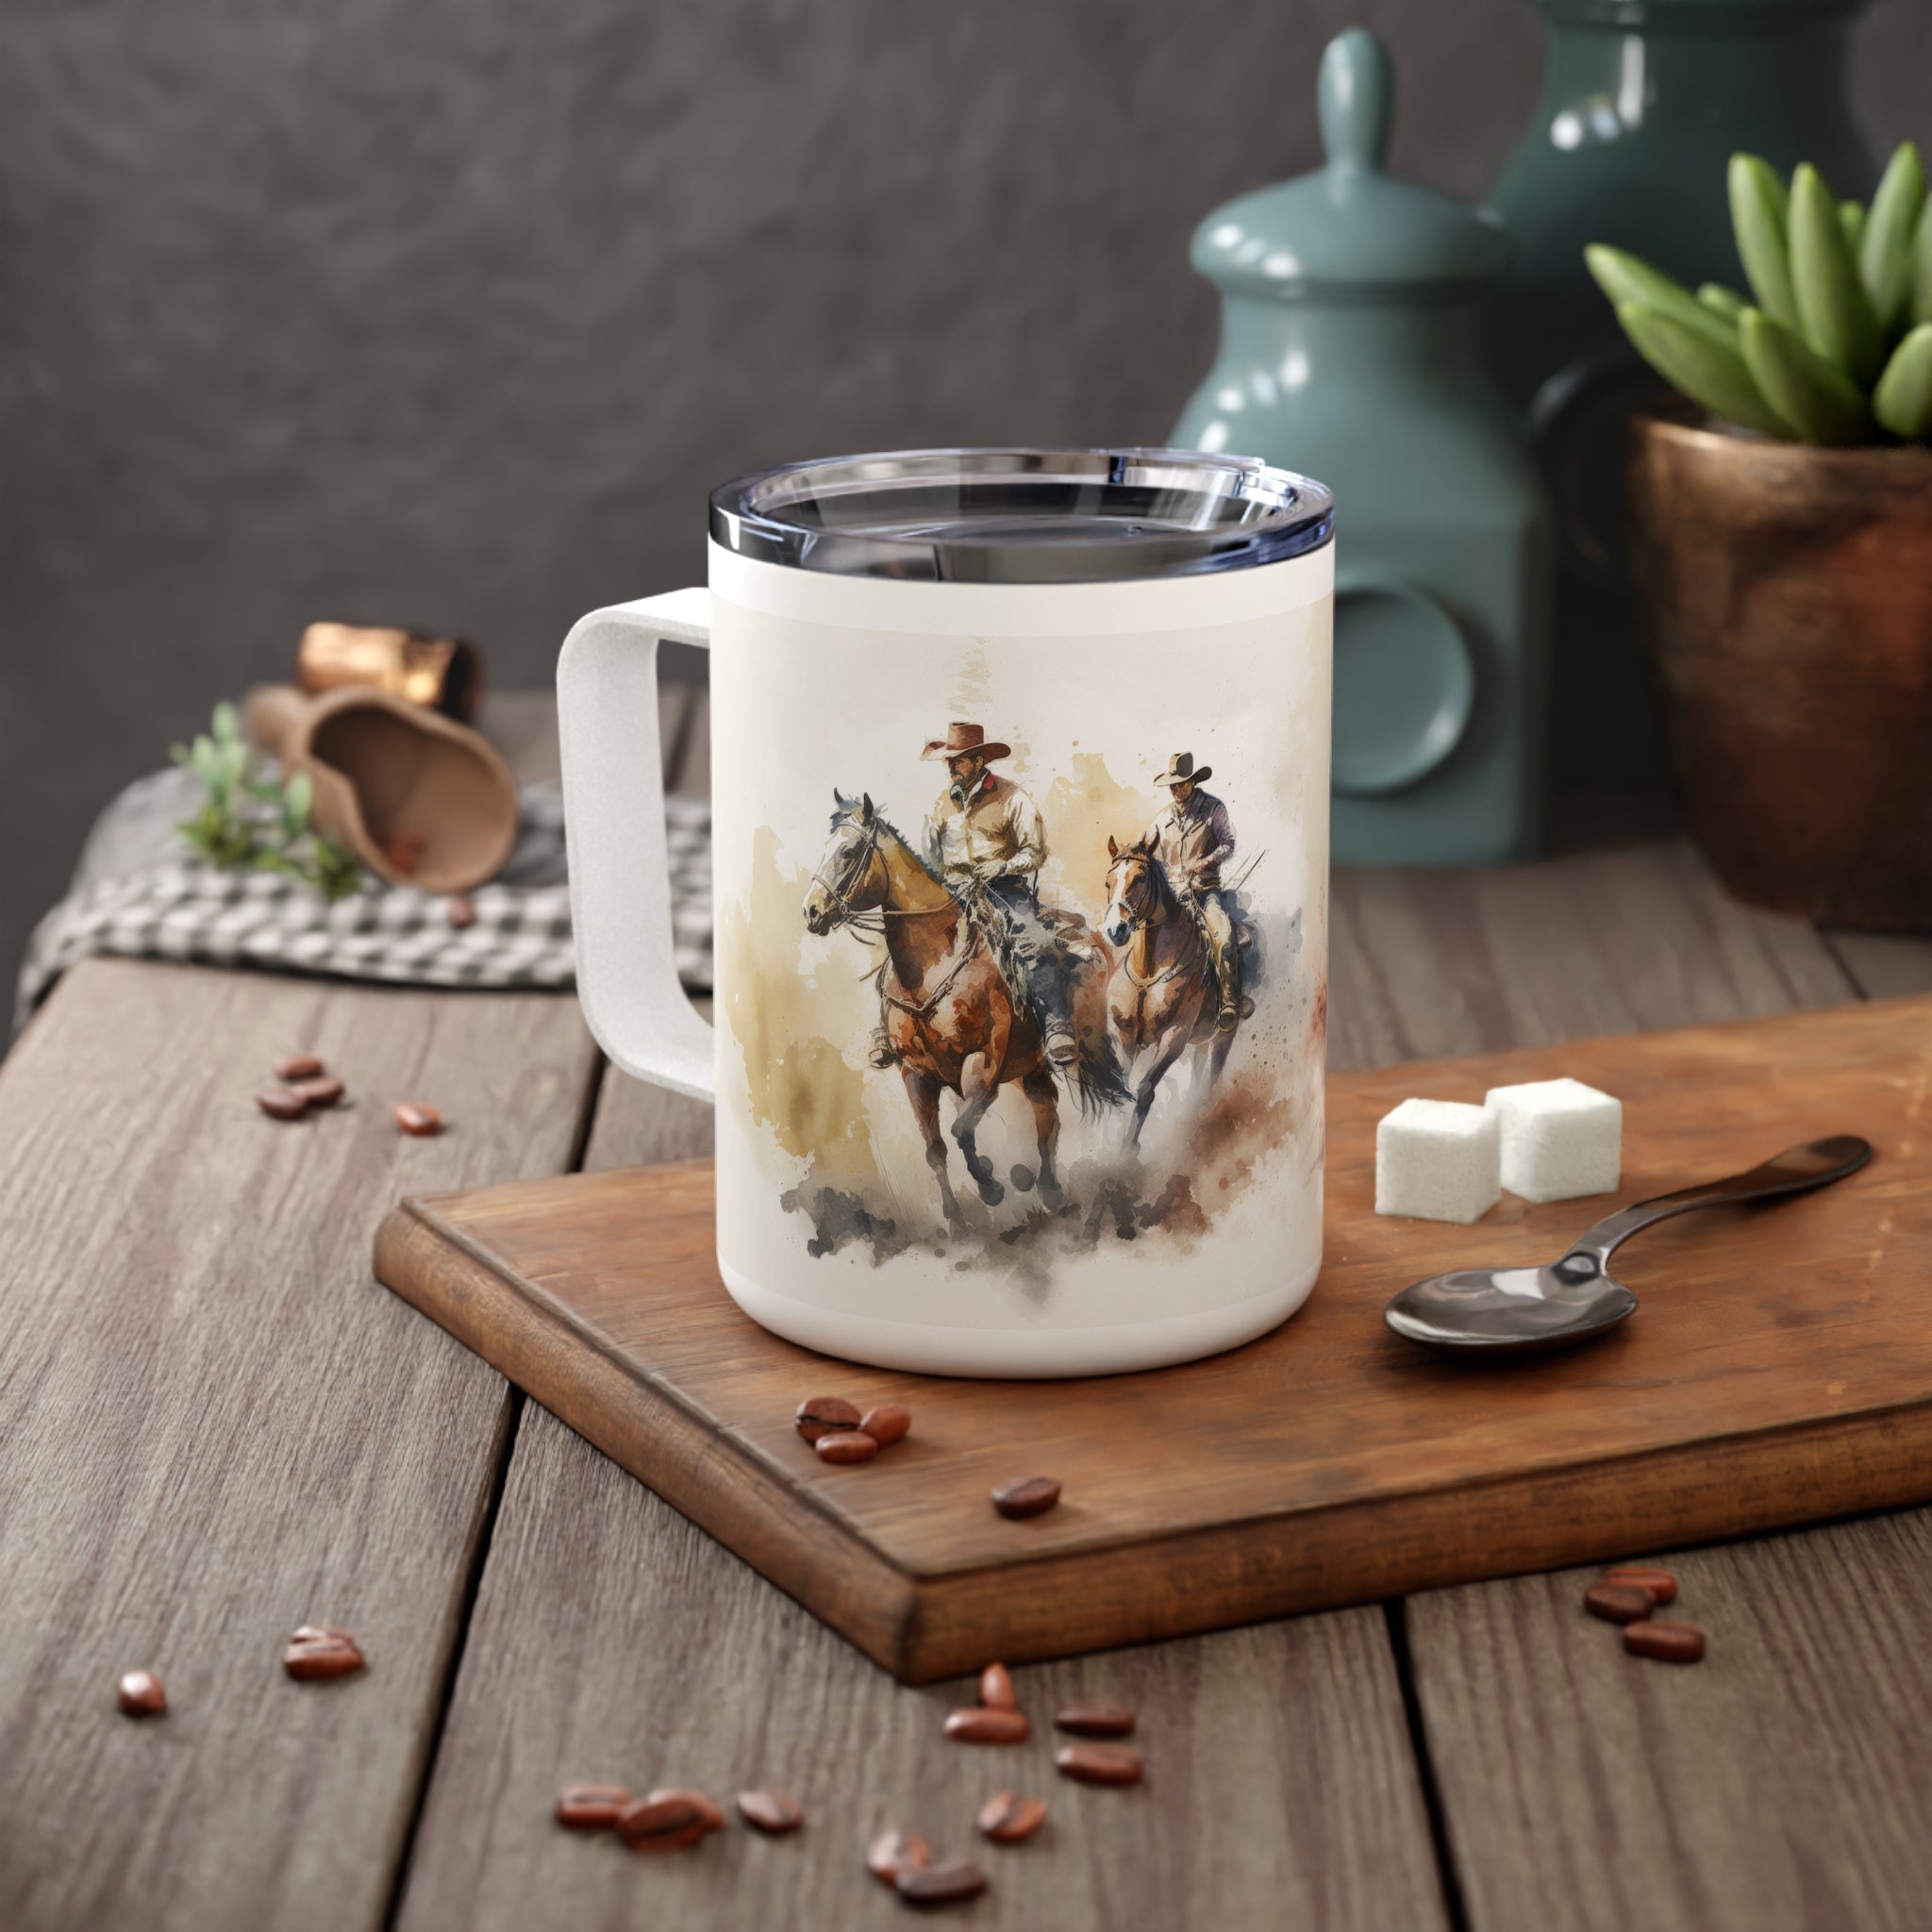  Bubble Hugs Funny Western Coffee Mug 11oz White - Hold Your  Horses - Cowboy Rodeo Horse Lover Riding Stable Adventure Wildwest : Home &  Kitchen